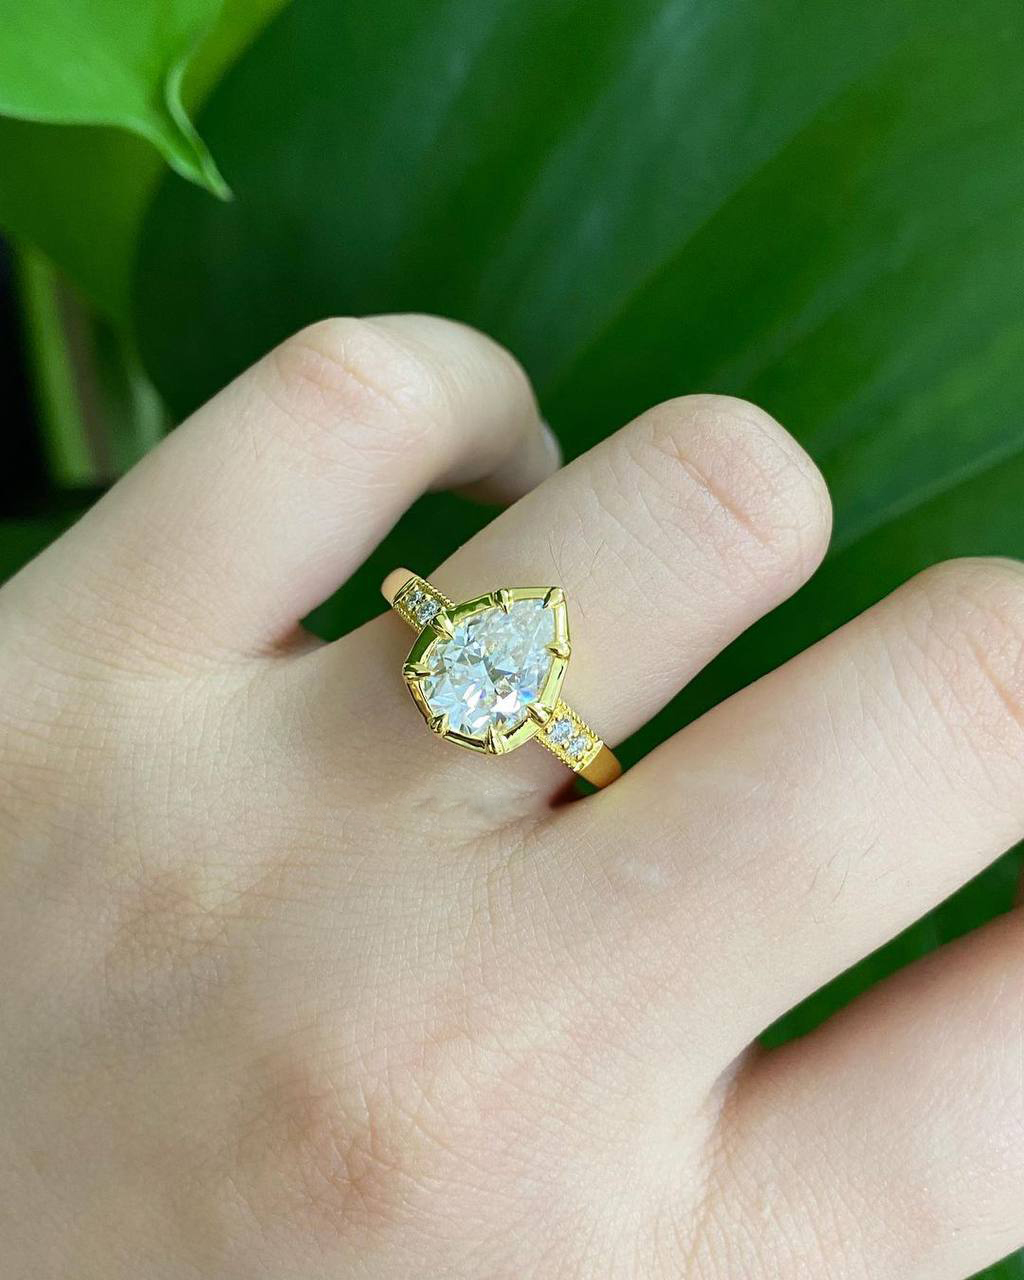 2 Ct Pear Shaped CZ Engagement Ring, Pear Solitaire Ring, Wedding,Bridal Ring Set, Solid White/Yellow/Rose Gold, Minimalist Dainty Gift Ring | Save 33% - Rajasthan Living 9